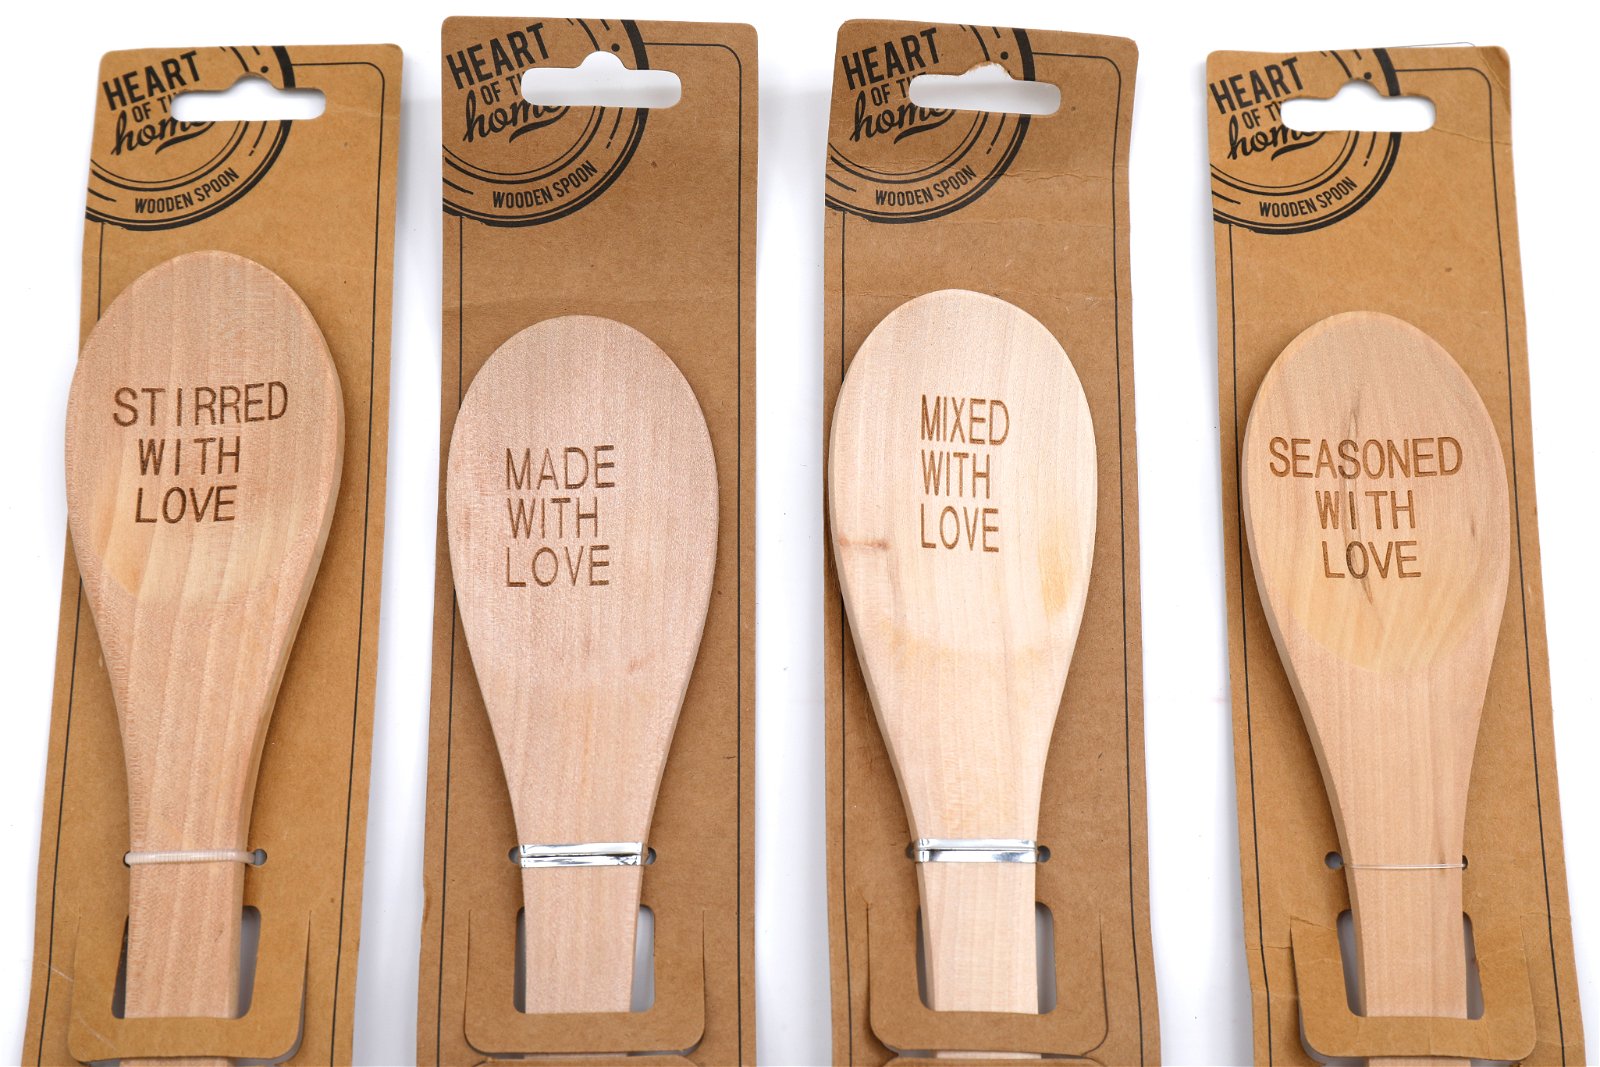 View Set of Four Wooden Spoons information